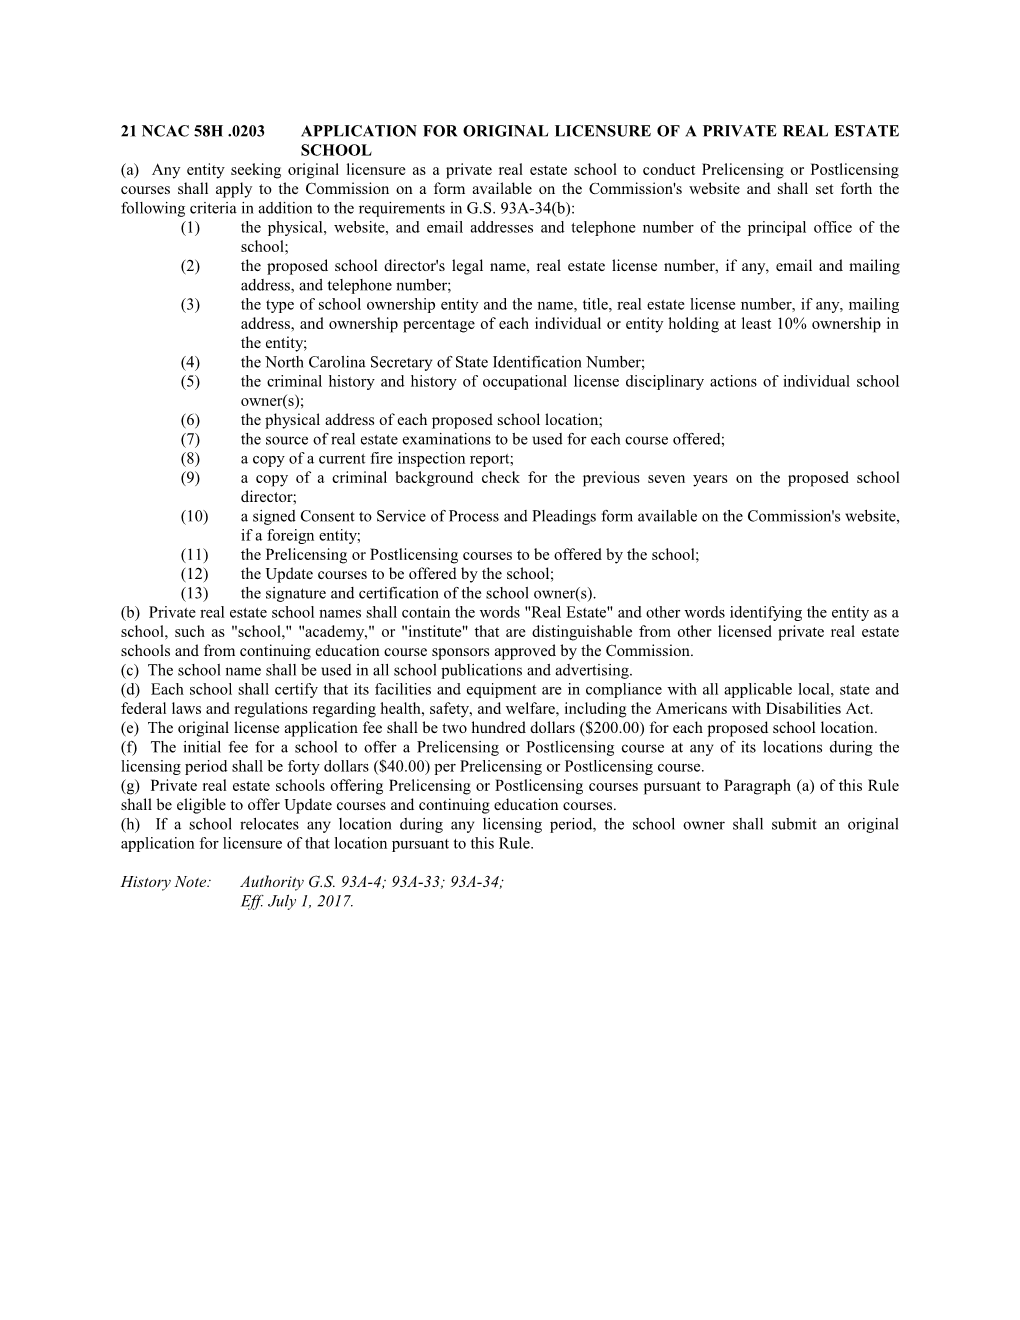 21 NCAC 58H .0203Application for ORIGINAL LICENSURE of a Private REAL ESTATE SCHOOL